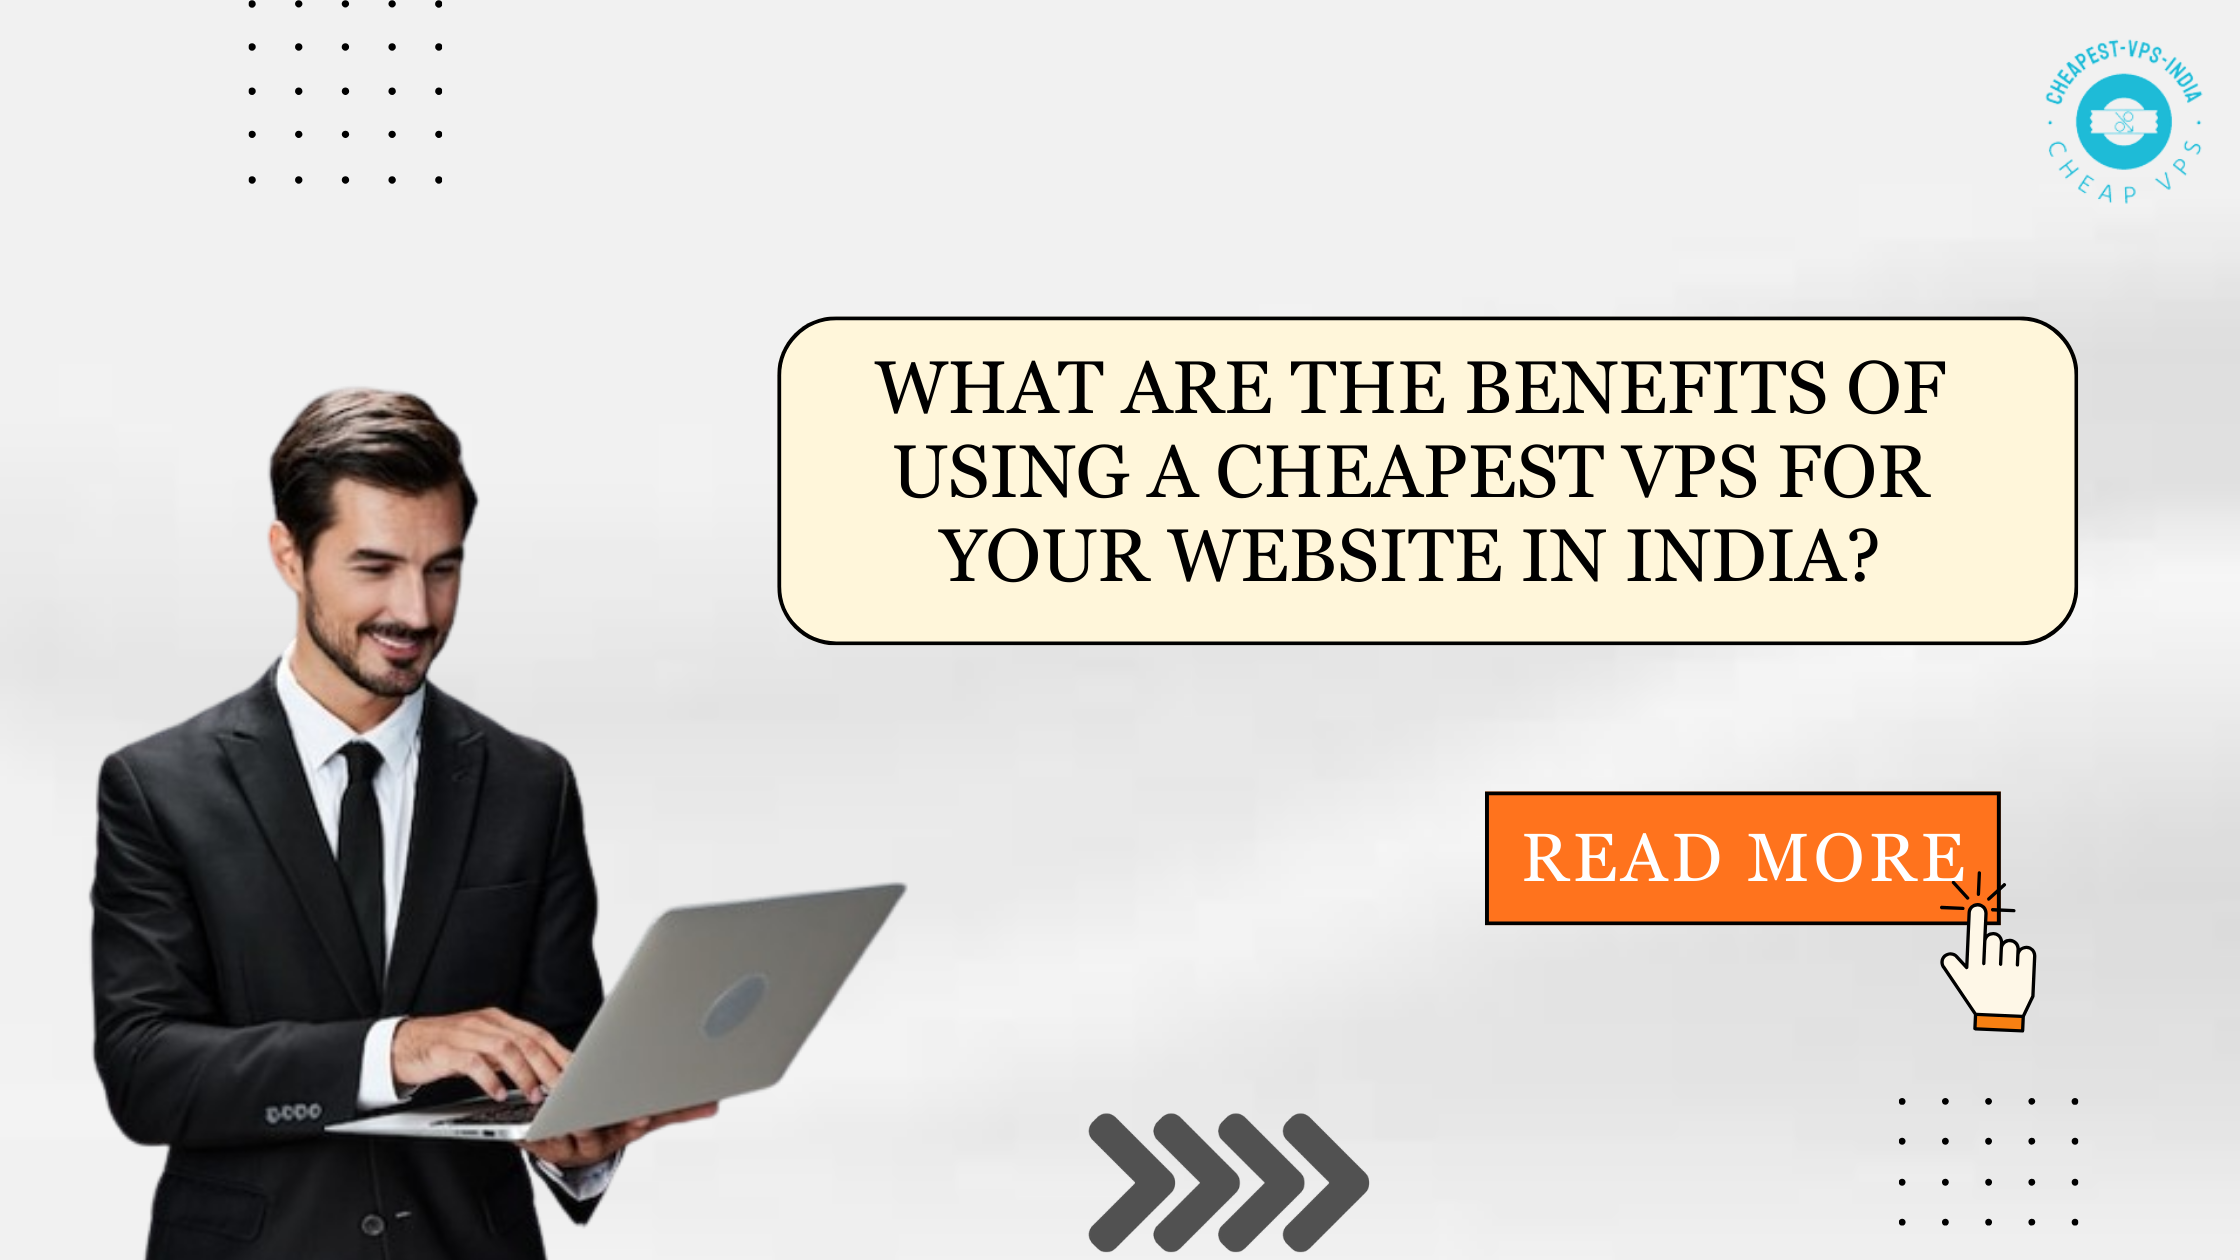 What Are the Benefits of Using a Cheapest VPS for Your Website in India